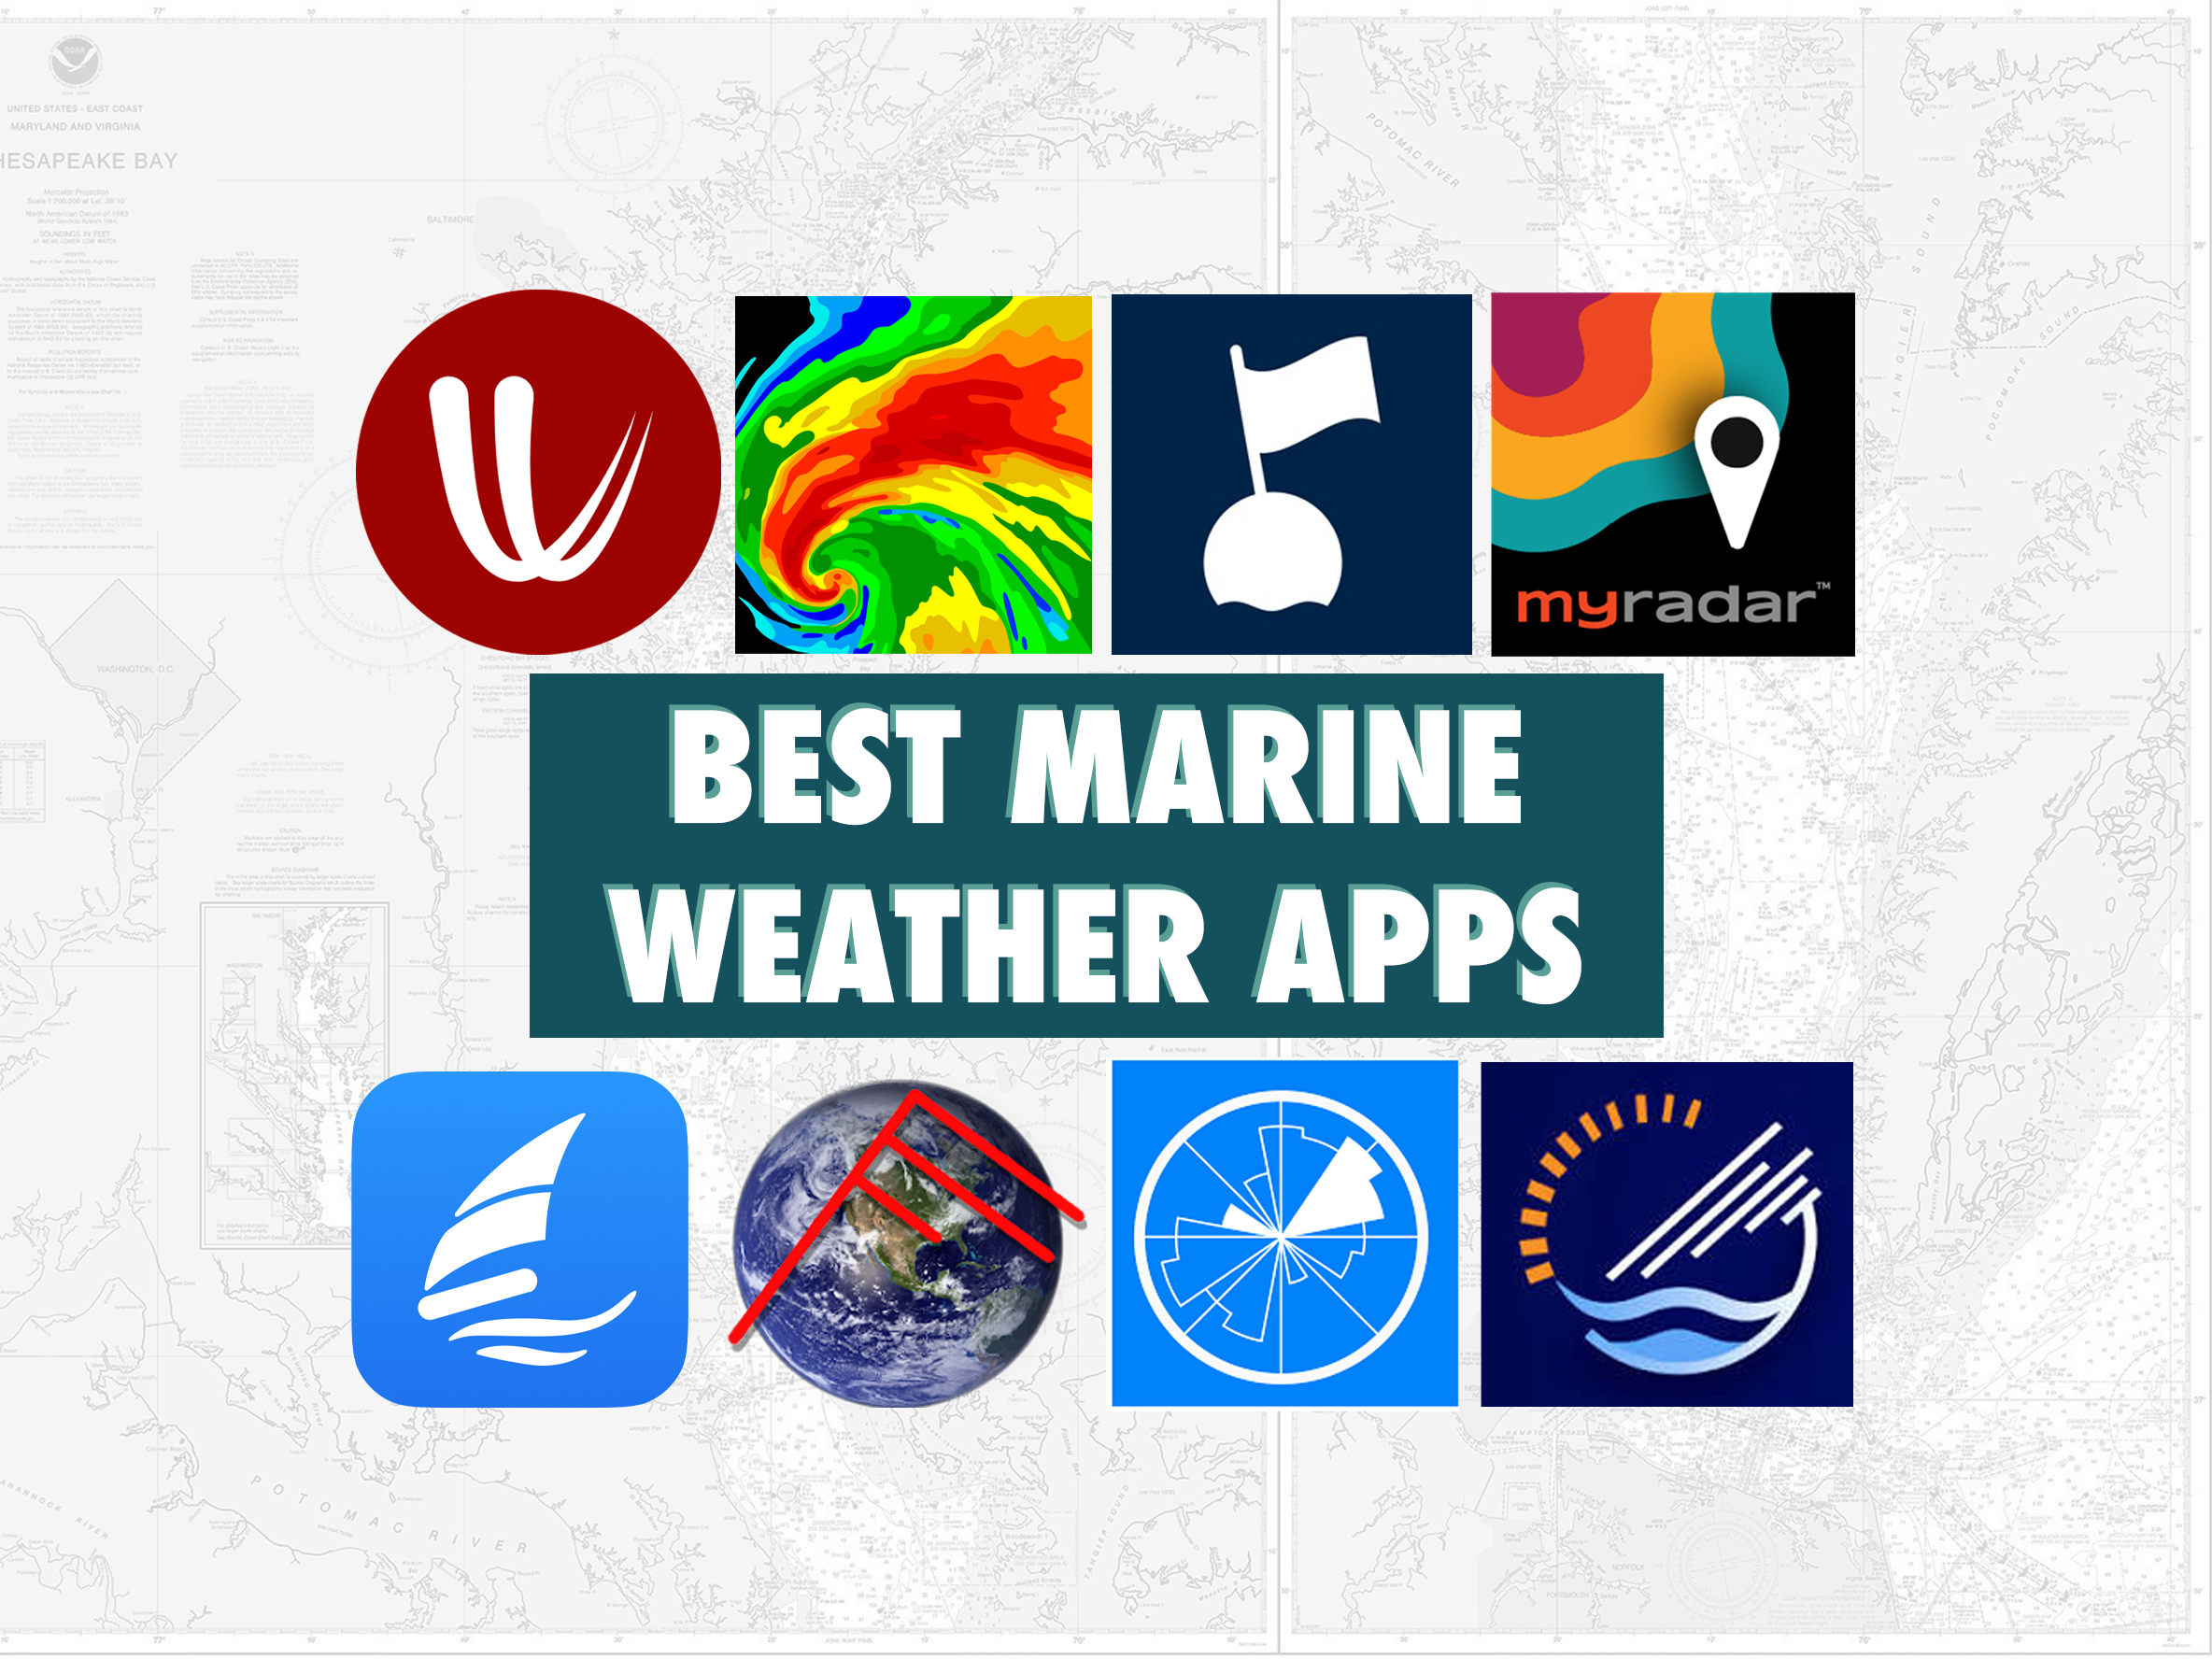 Best Marine Weather Apps for Boaters